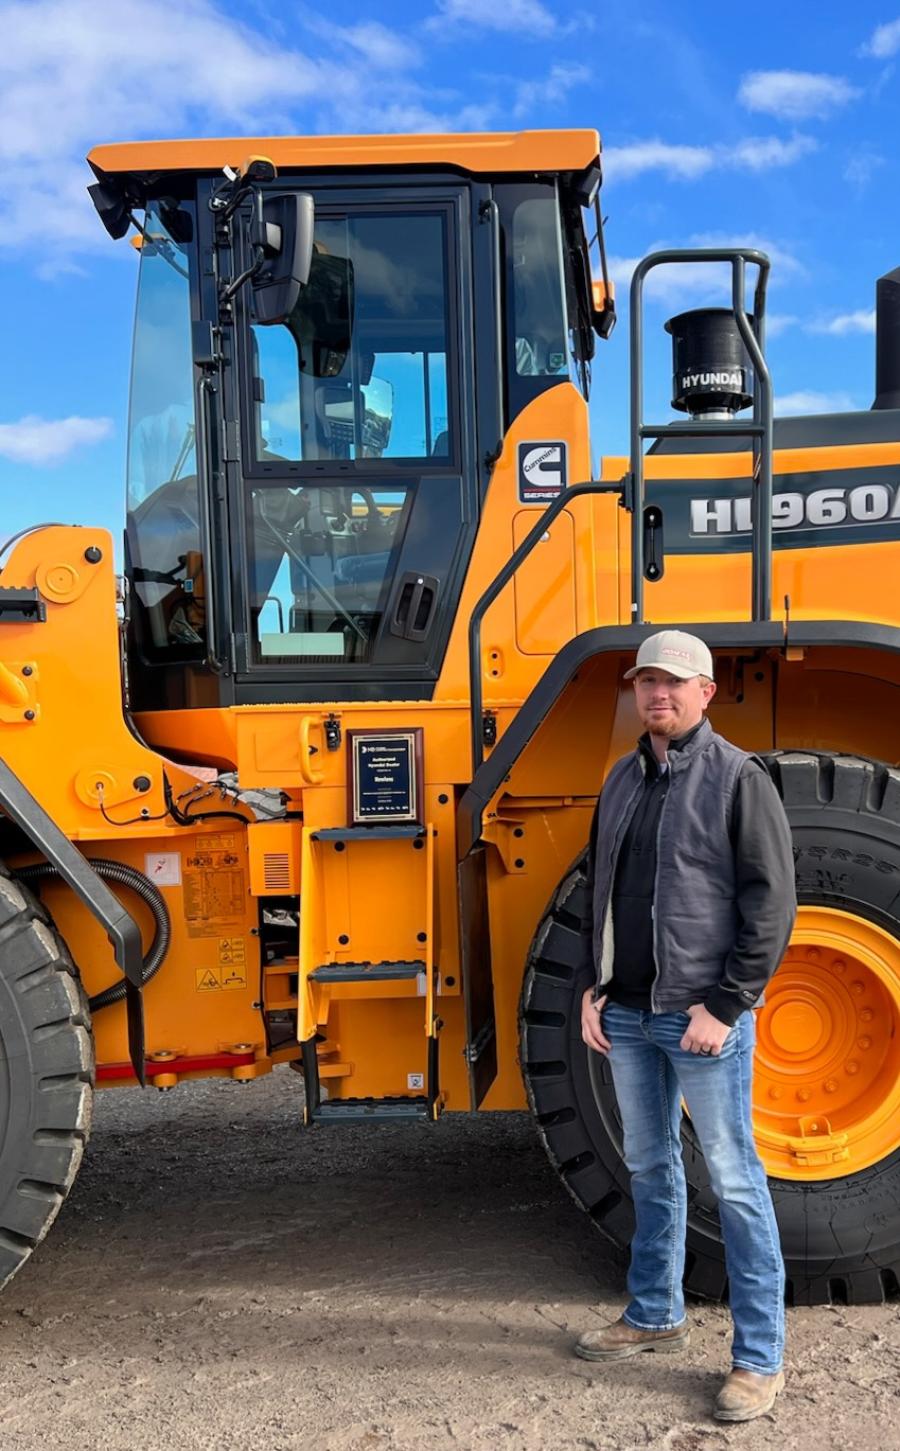 Beau Newlon, president, Newlons International Sales, Elkins, W. Va., said his company is better positioned to serve current and future customers after recently joining the Hyundai Construction Equipment North America dealer network.